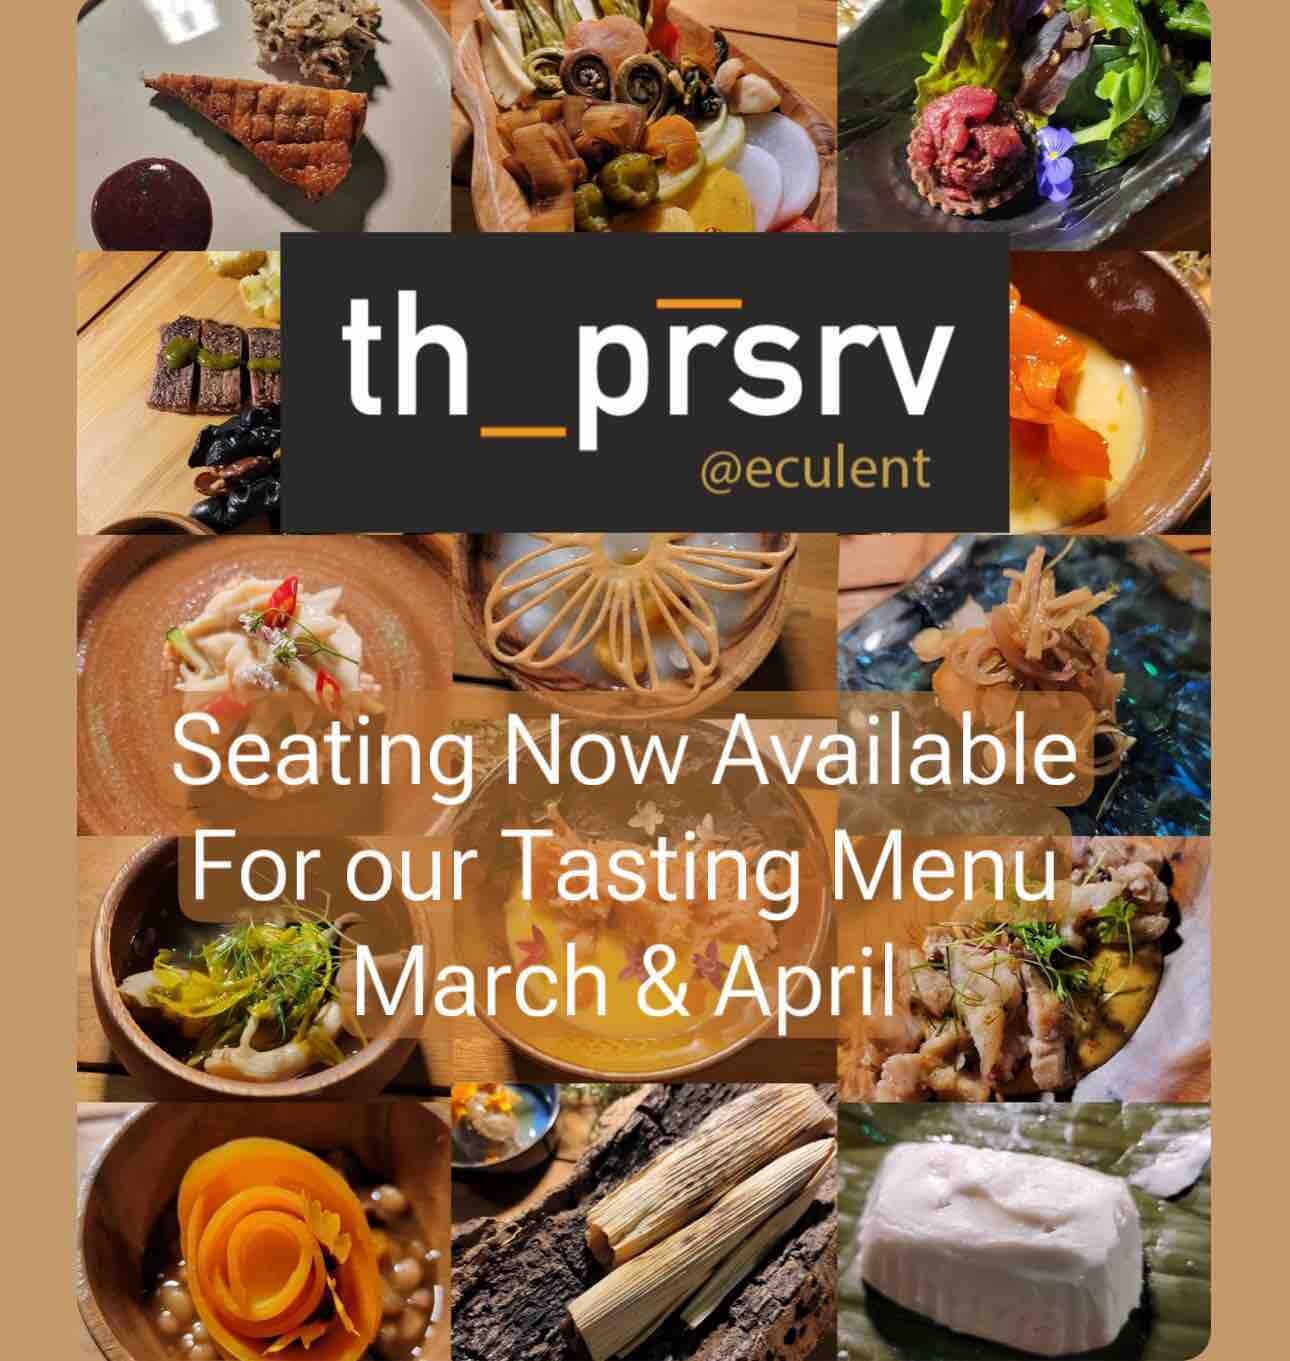 Curious to try one of the #topten #newrestaurants in #Houston ? Head to https://thprsrv.com and save your place in our linited seating enclave in #Kemah #indigenousfood #choctaw #travelingchefskinner #chefbenchawan #thprsrv #indigenouscuisine #foodan